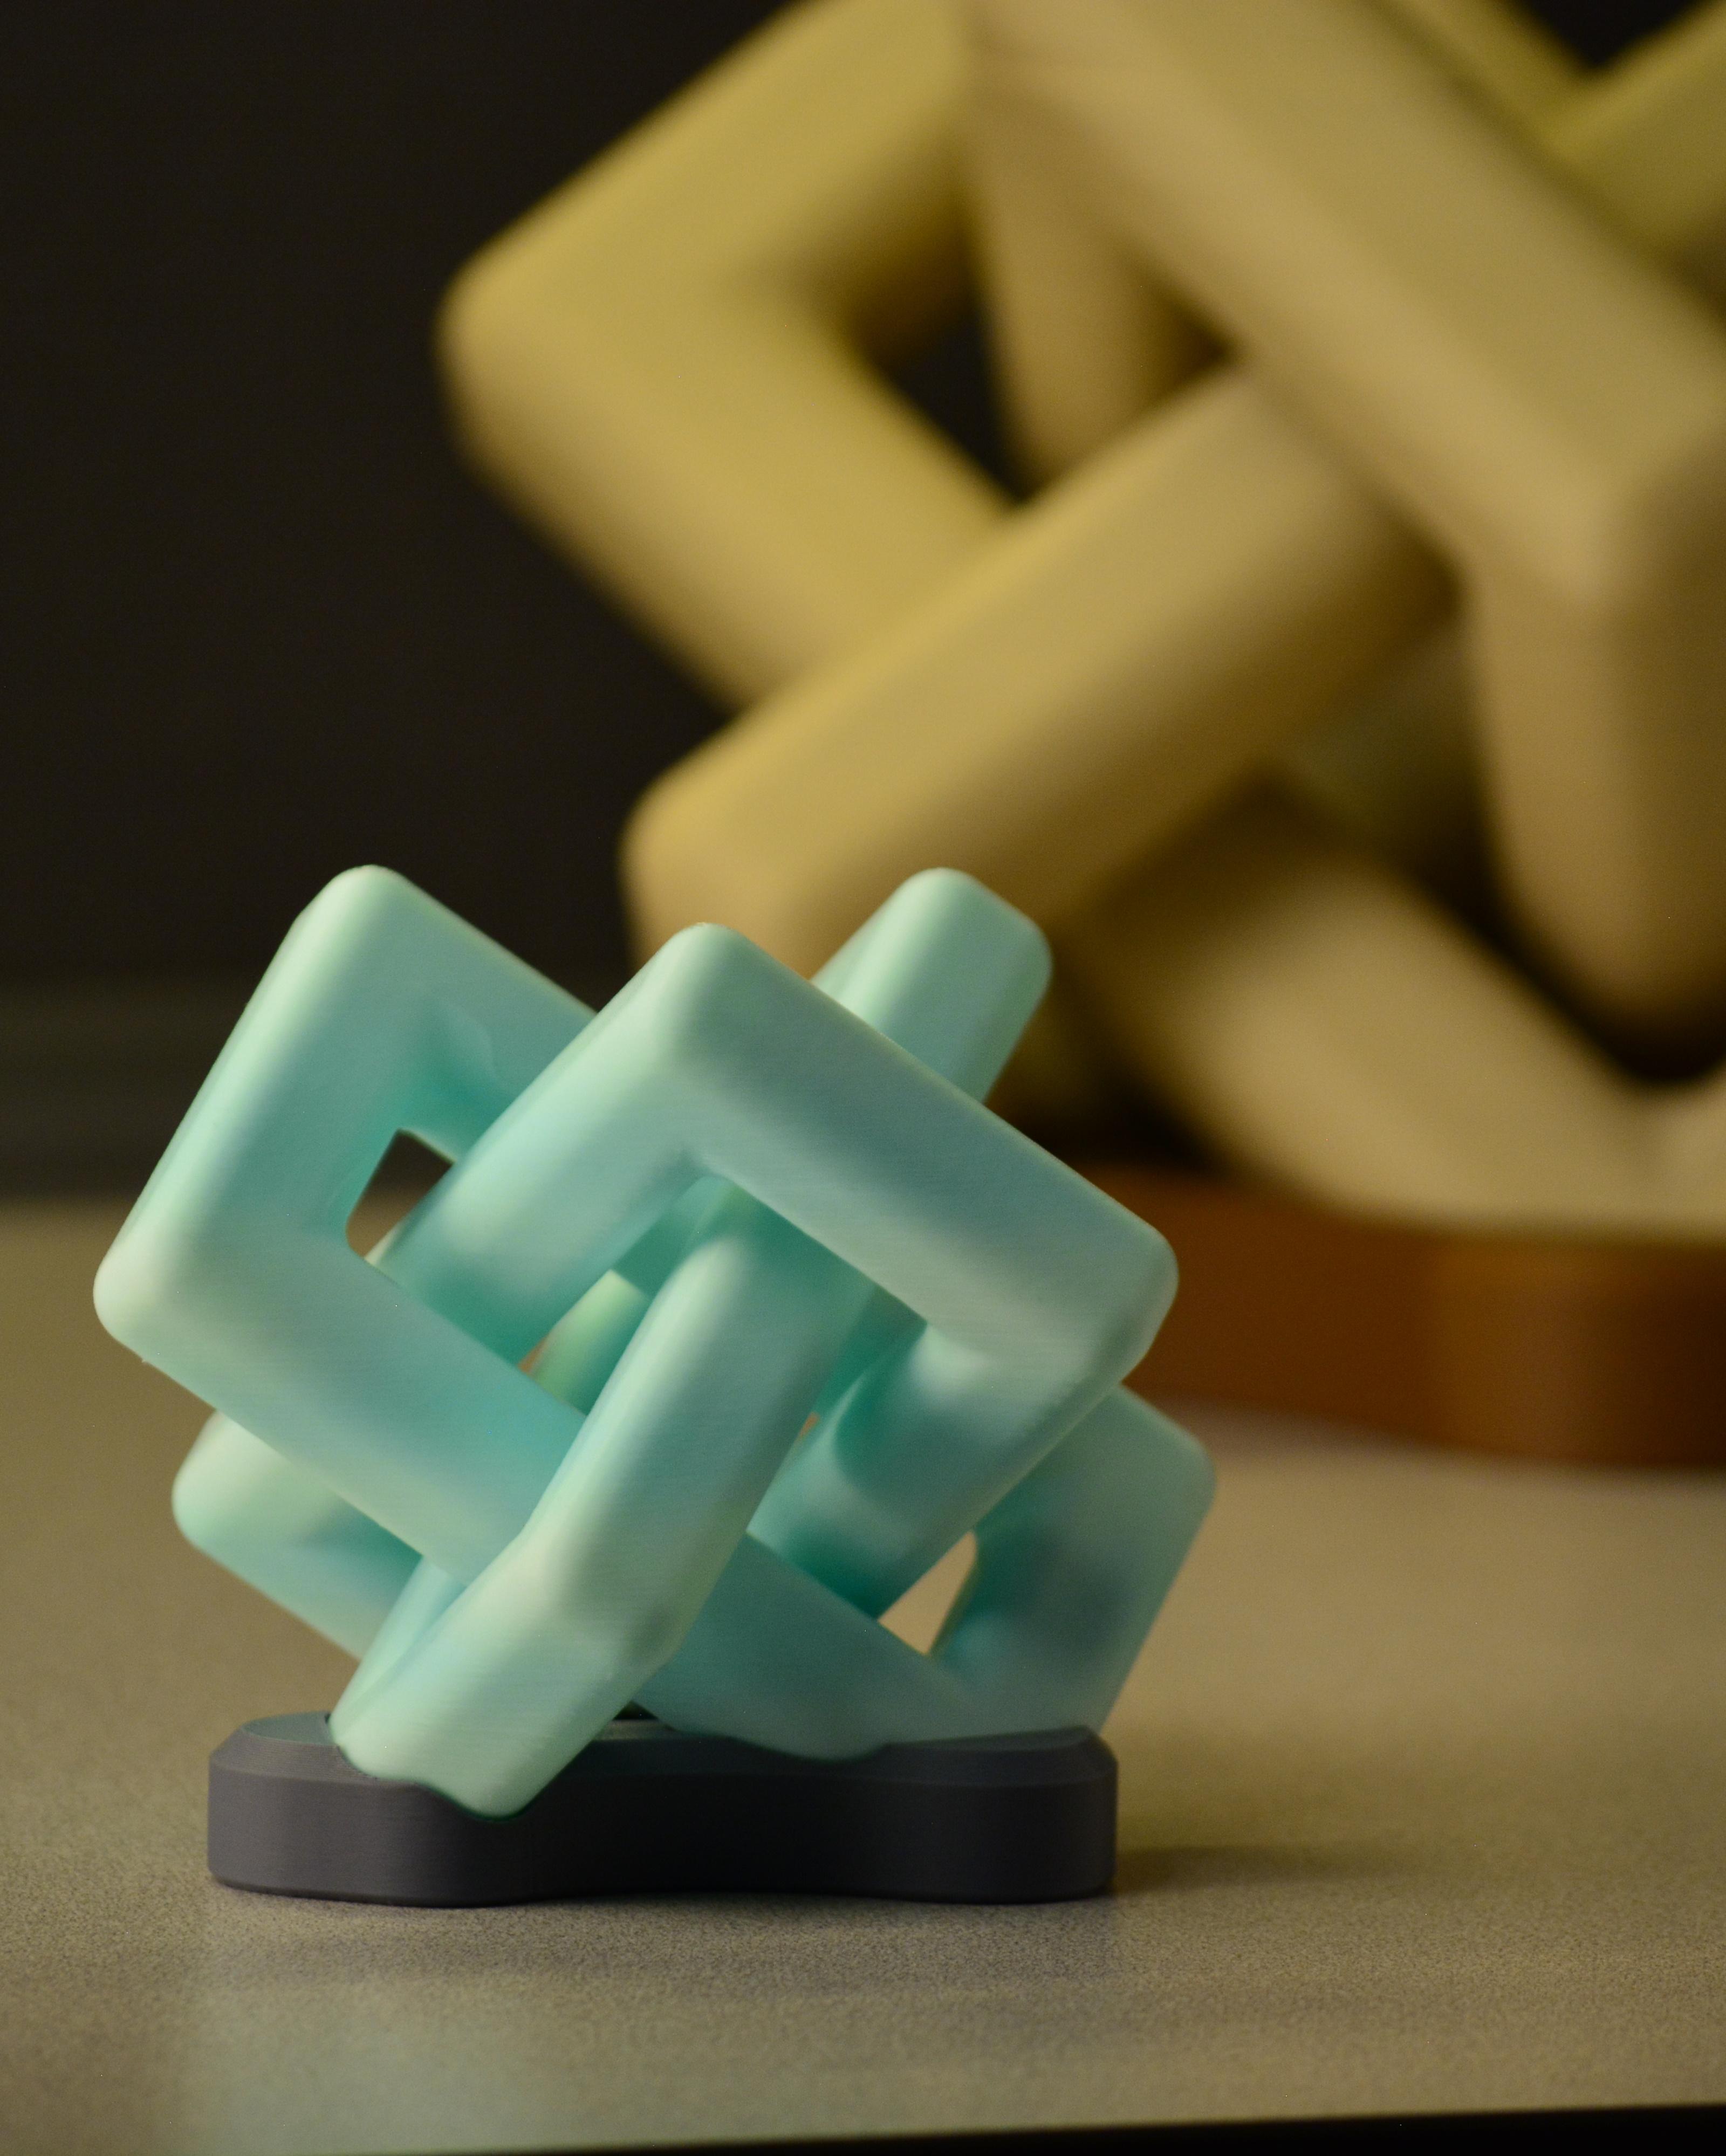 Tri-linked Knot - Print in place 3d model